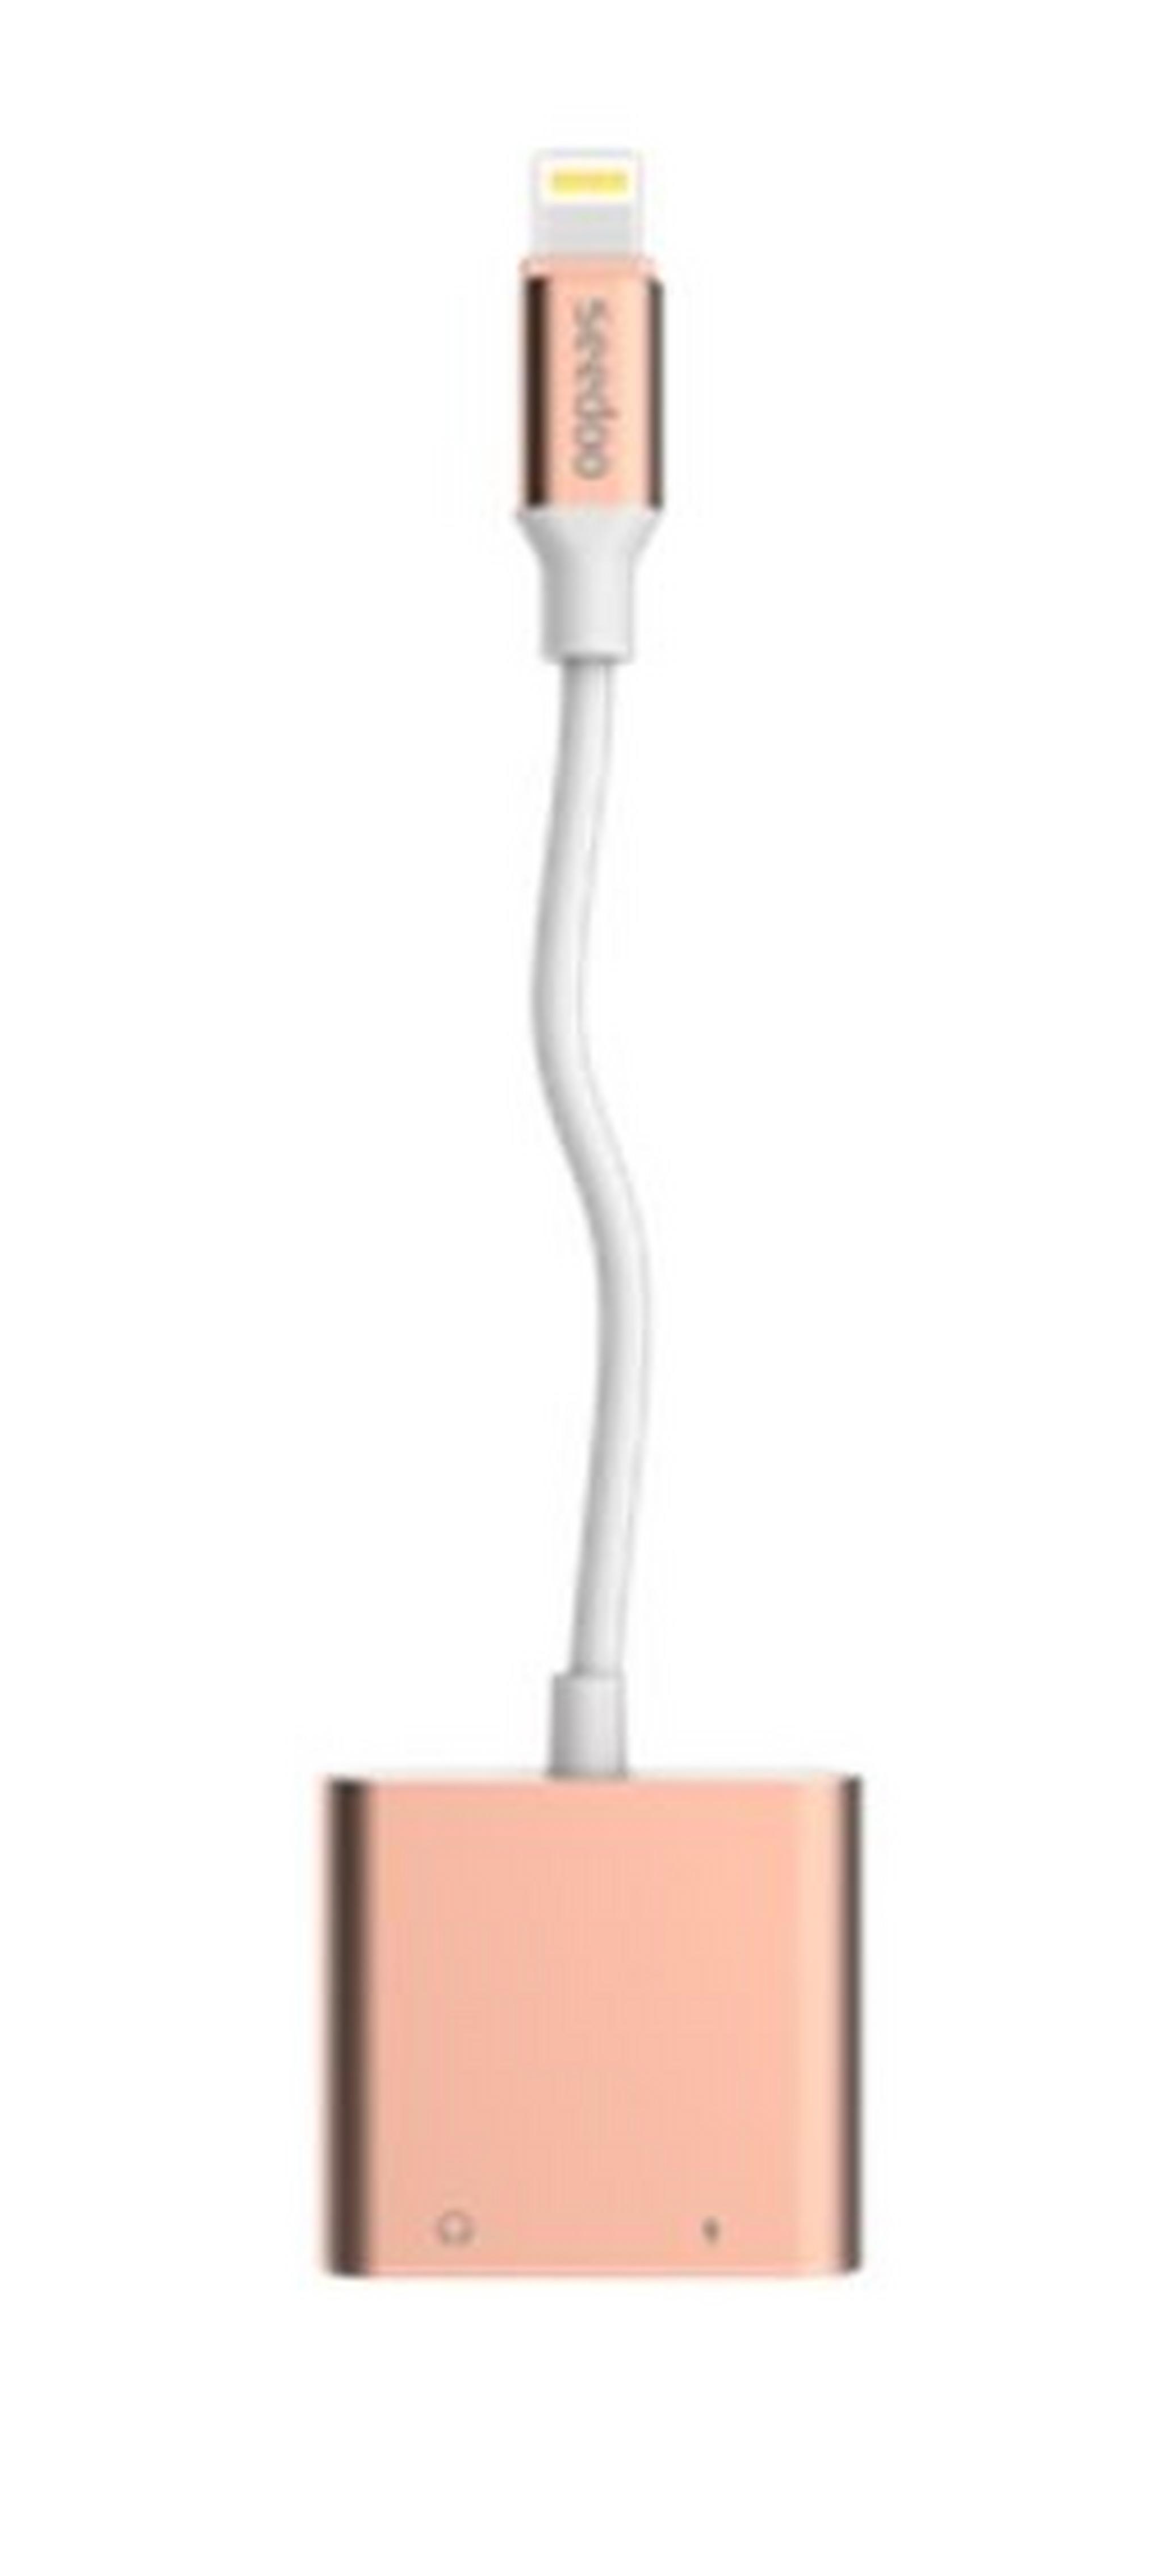 Seedoo Lightning and AUX Plug Adapter for iPhone – Rose Gold